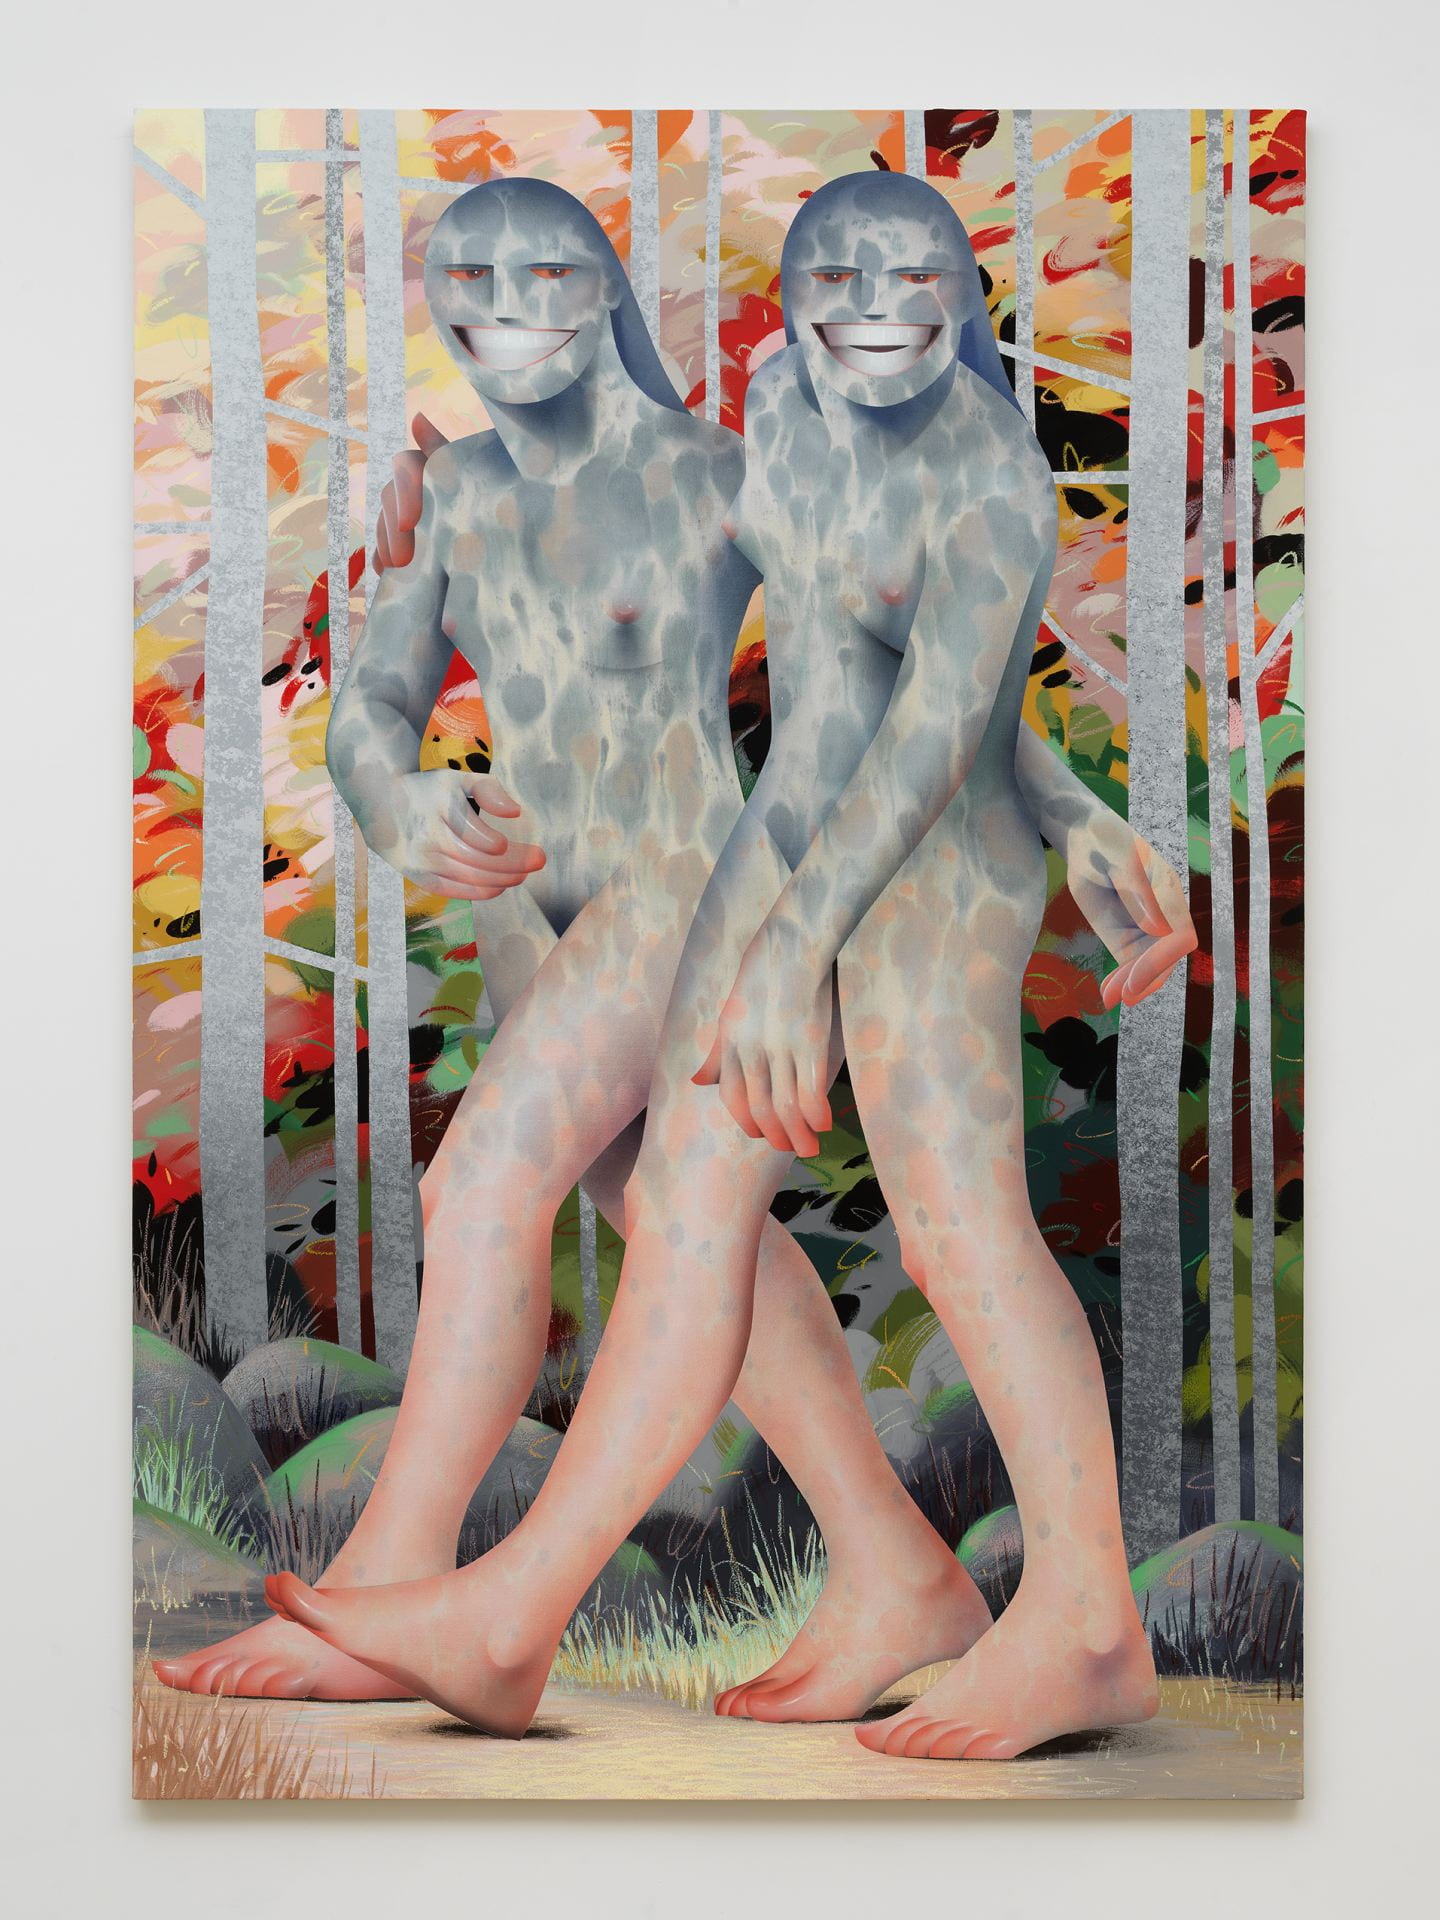 One of Robin F. William's works, titled "Bechdel Yetis," was created using oil, acrylic and Flashe on canvas. Collection of Sam &amp; Shanit Schwartz. Courtesy of the artist and P.P.O.W, New York. Credit: Dario Lasagni